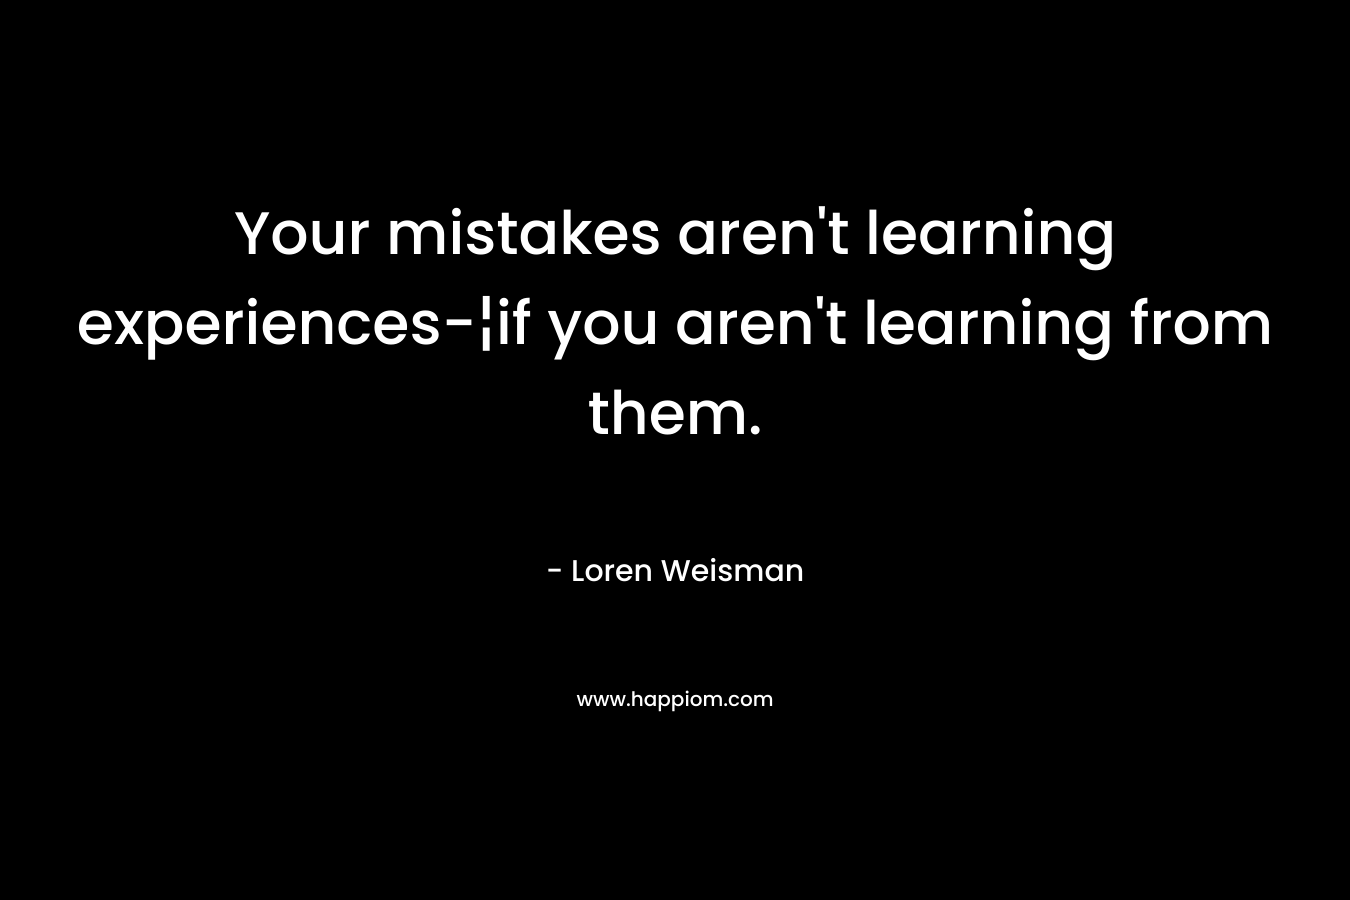 Your mistakes aren't learning experiences-¦if you aren't learning from them.